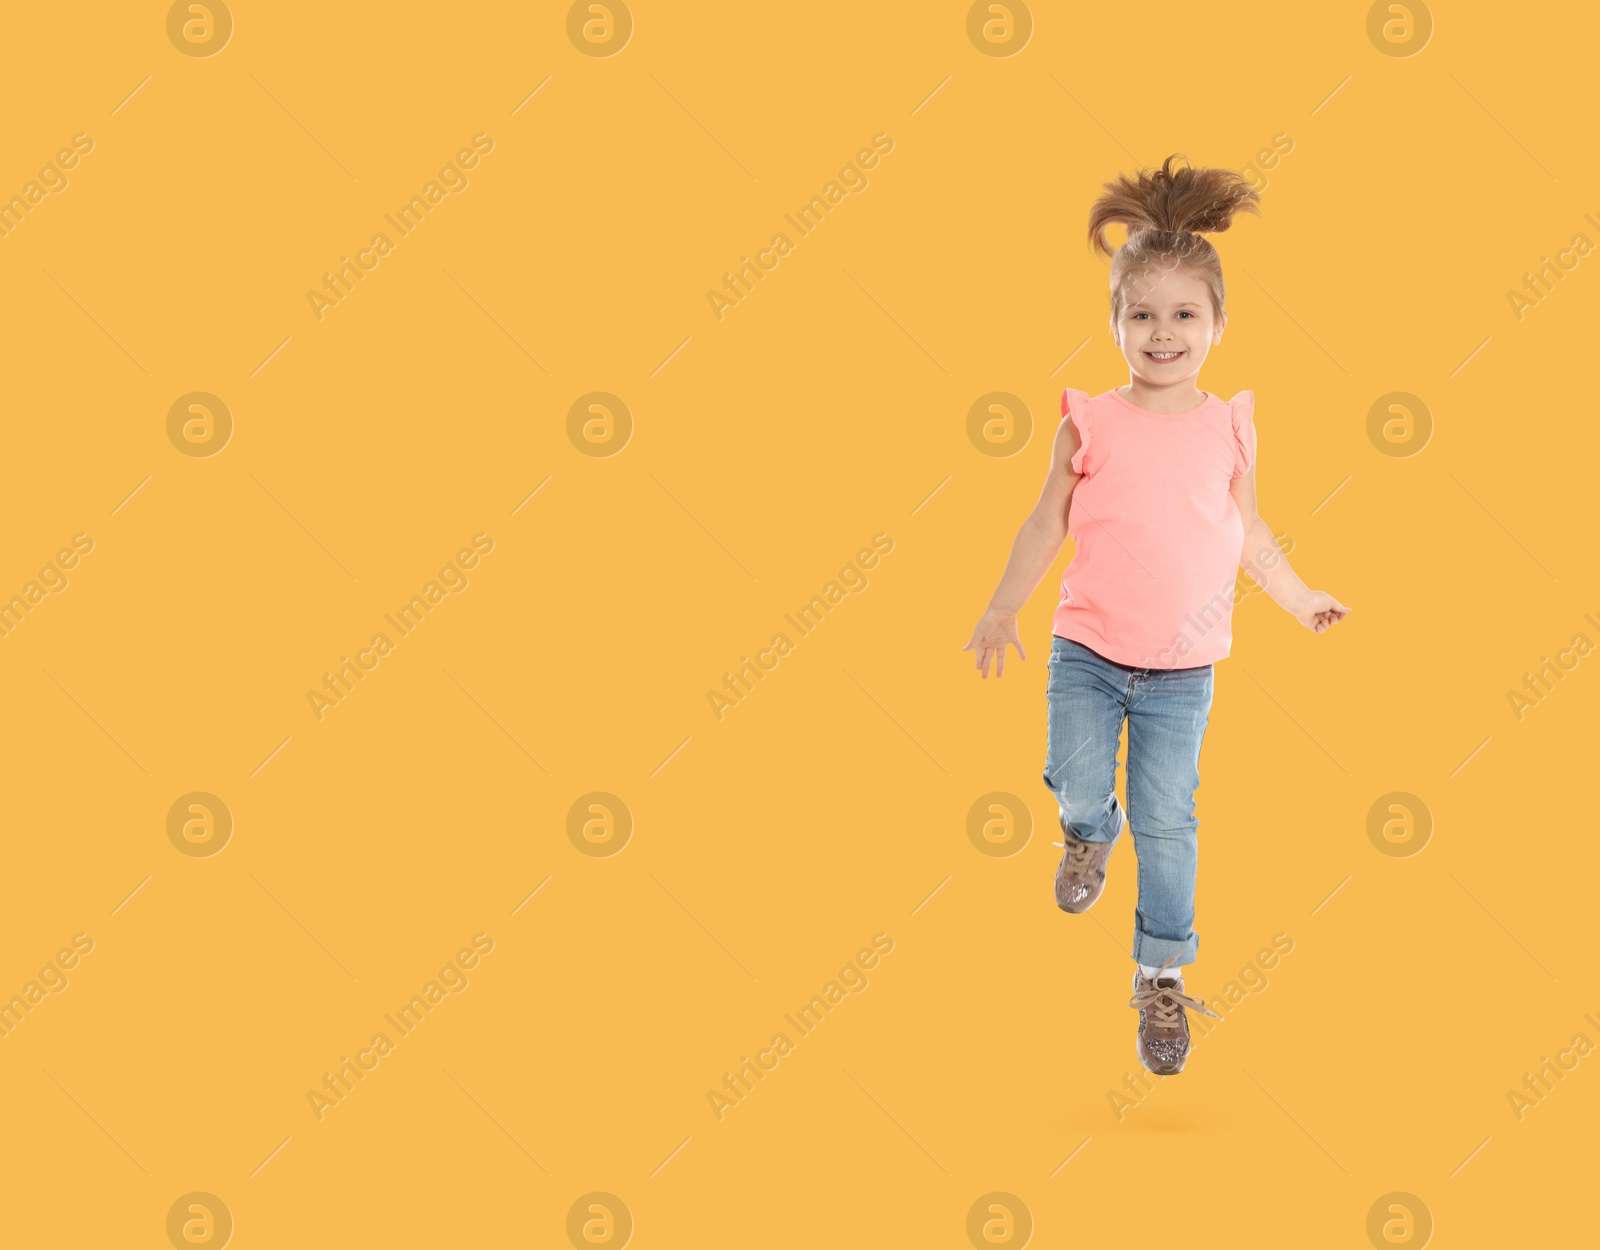 Image of Cute girl jumping on pale orange background, space for text